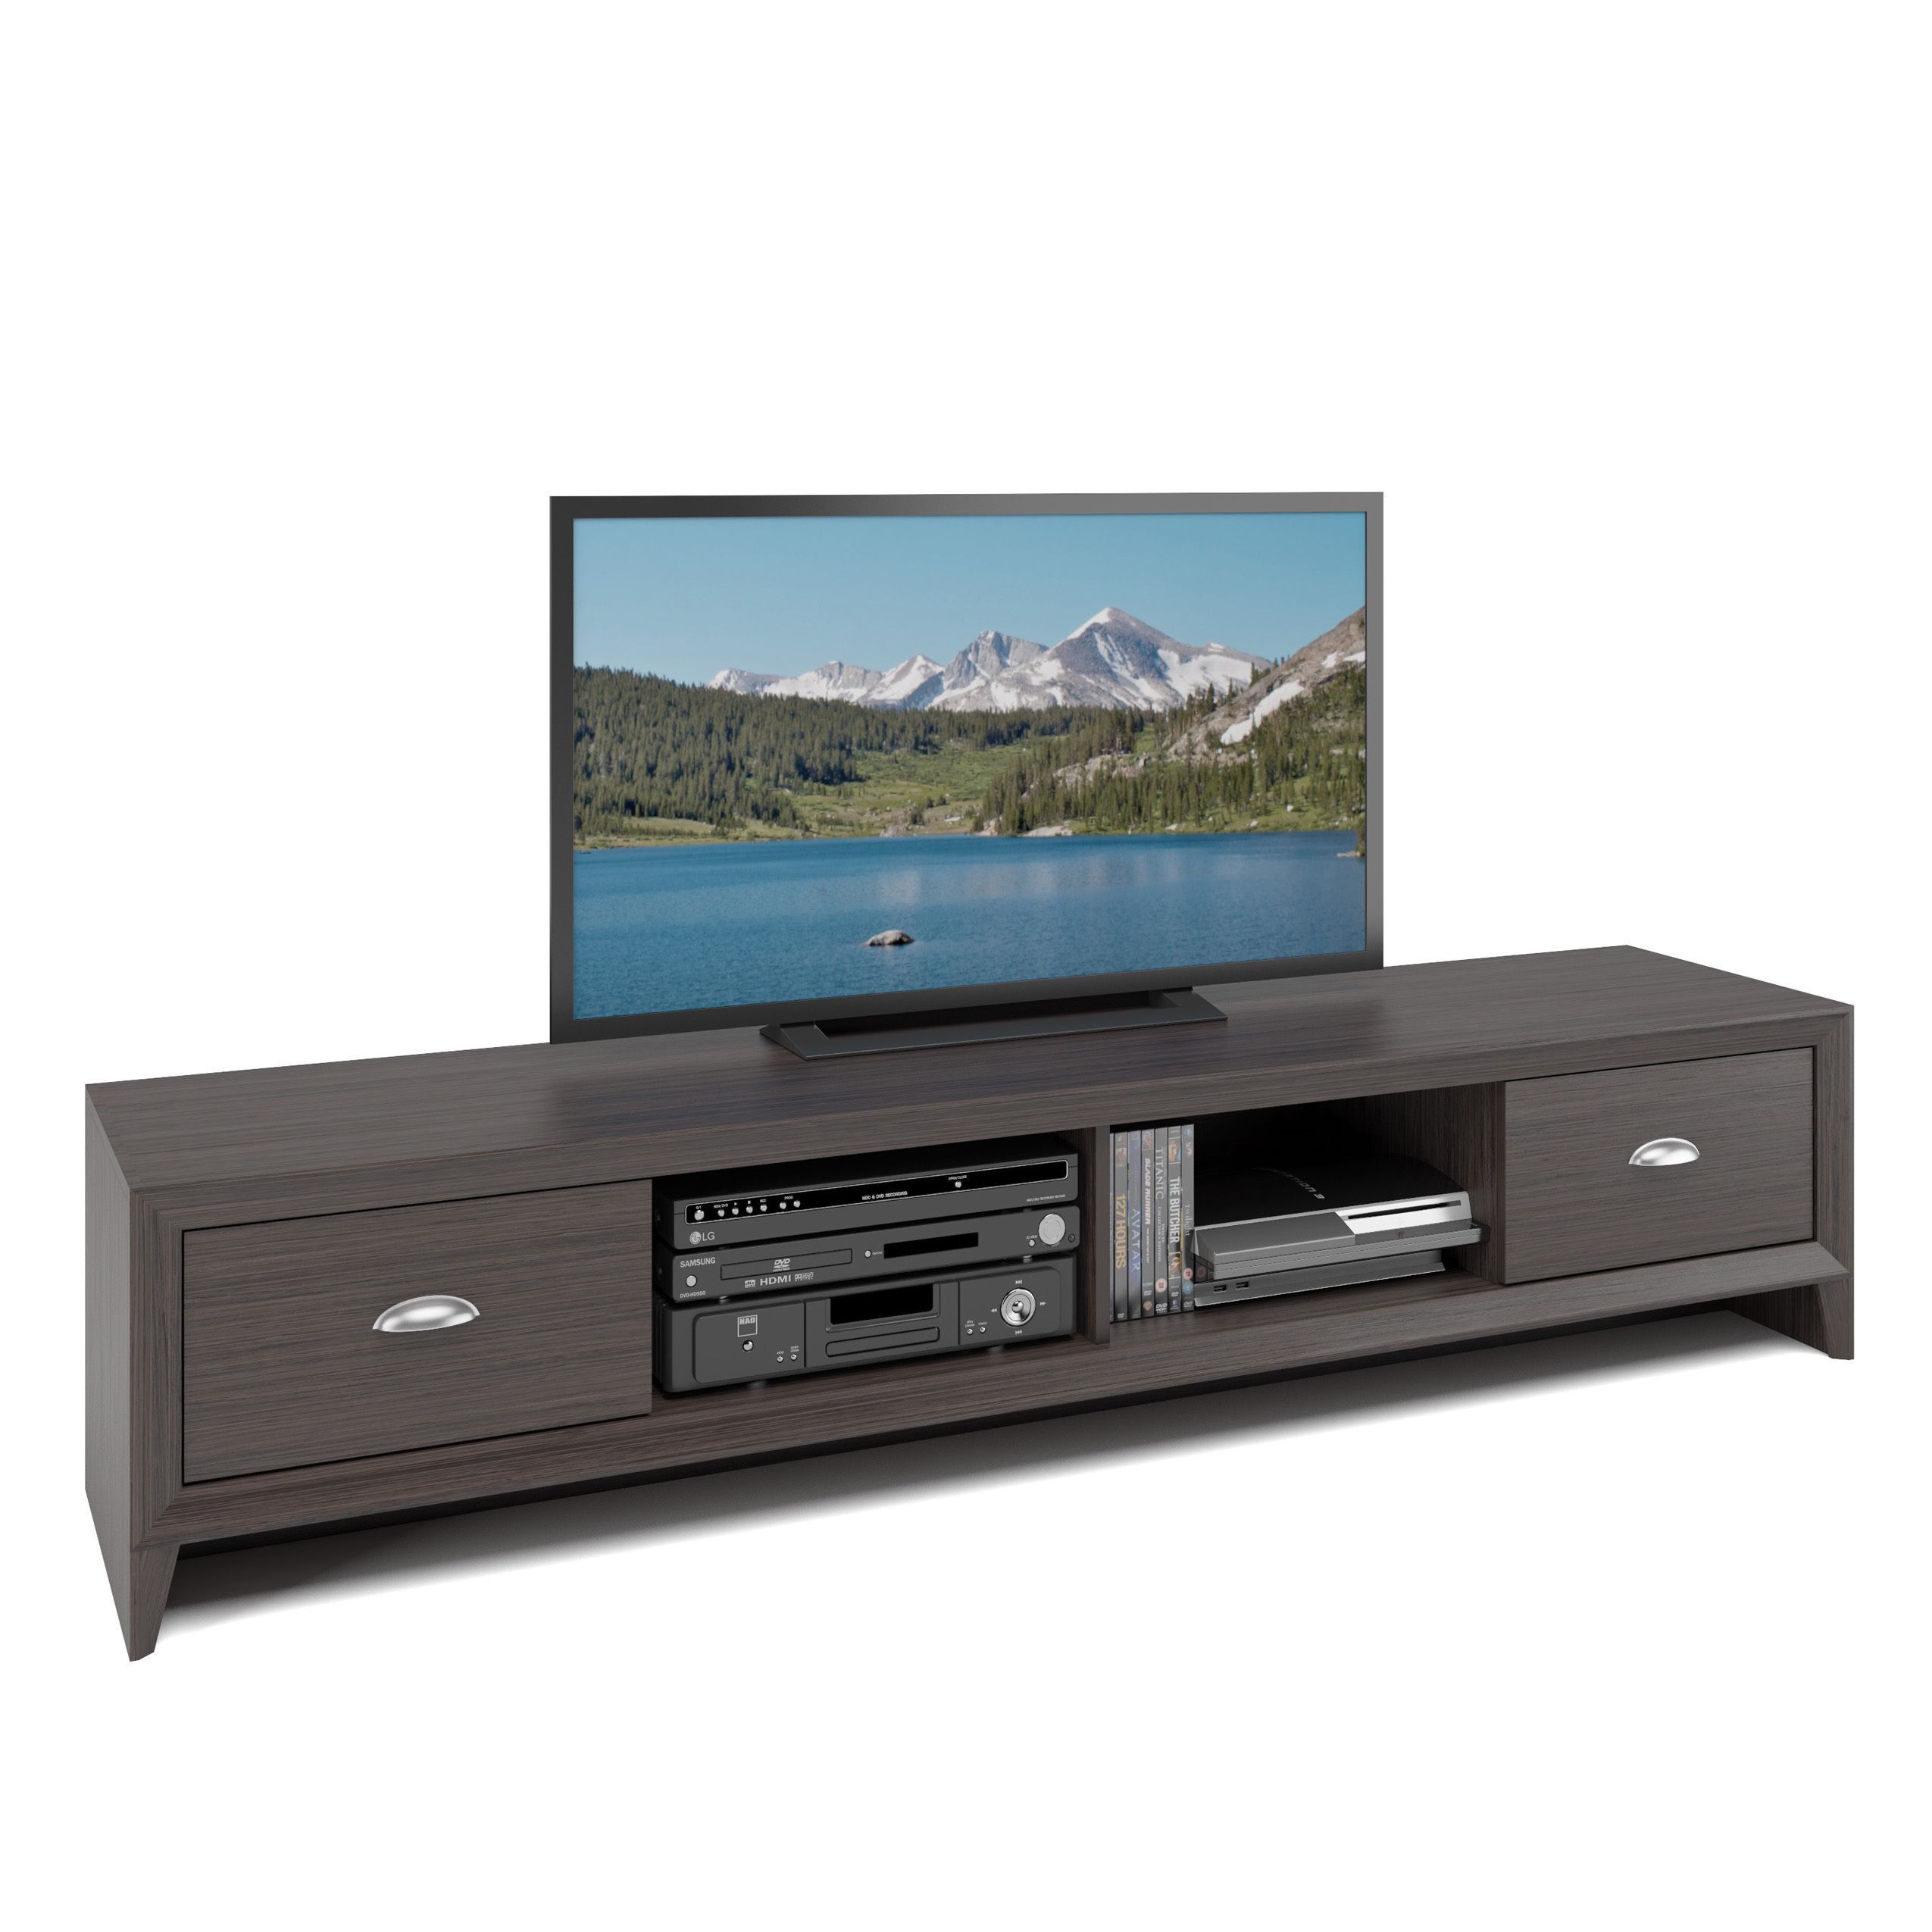 Our Best Living Room Furniture Deals | Tv Bench, Long Tv With Regard To Extra Long Tv Units (View 4 of 15)